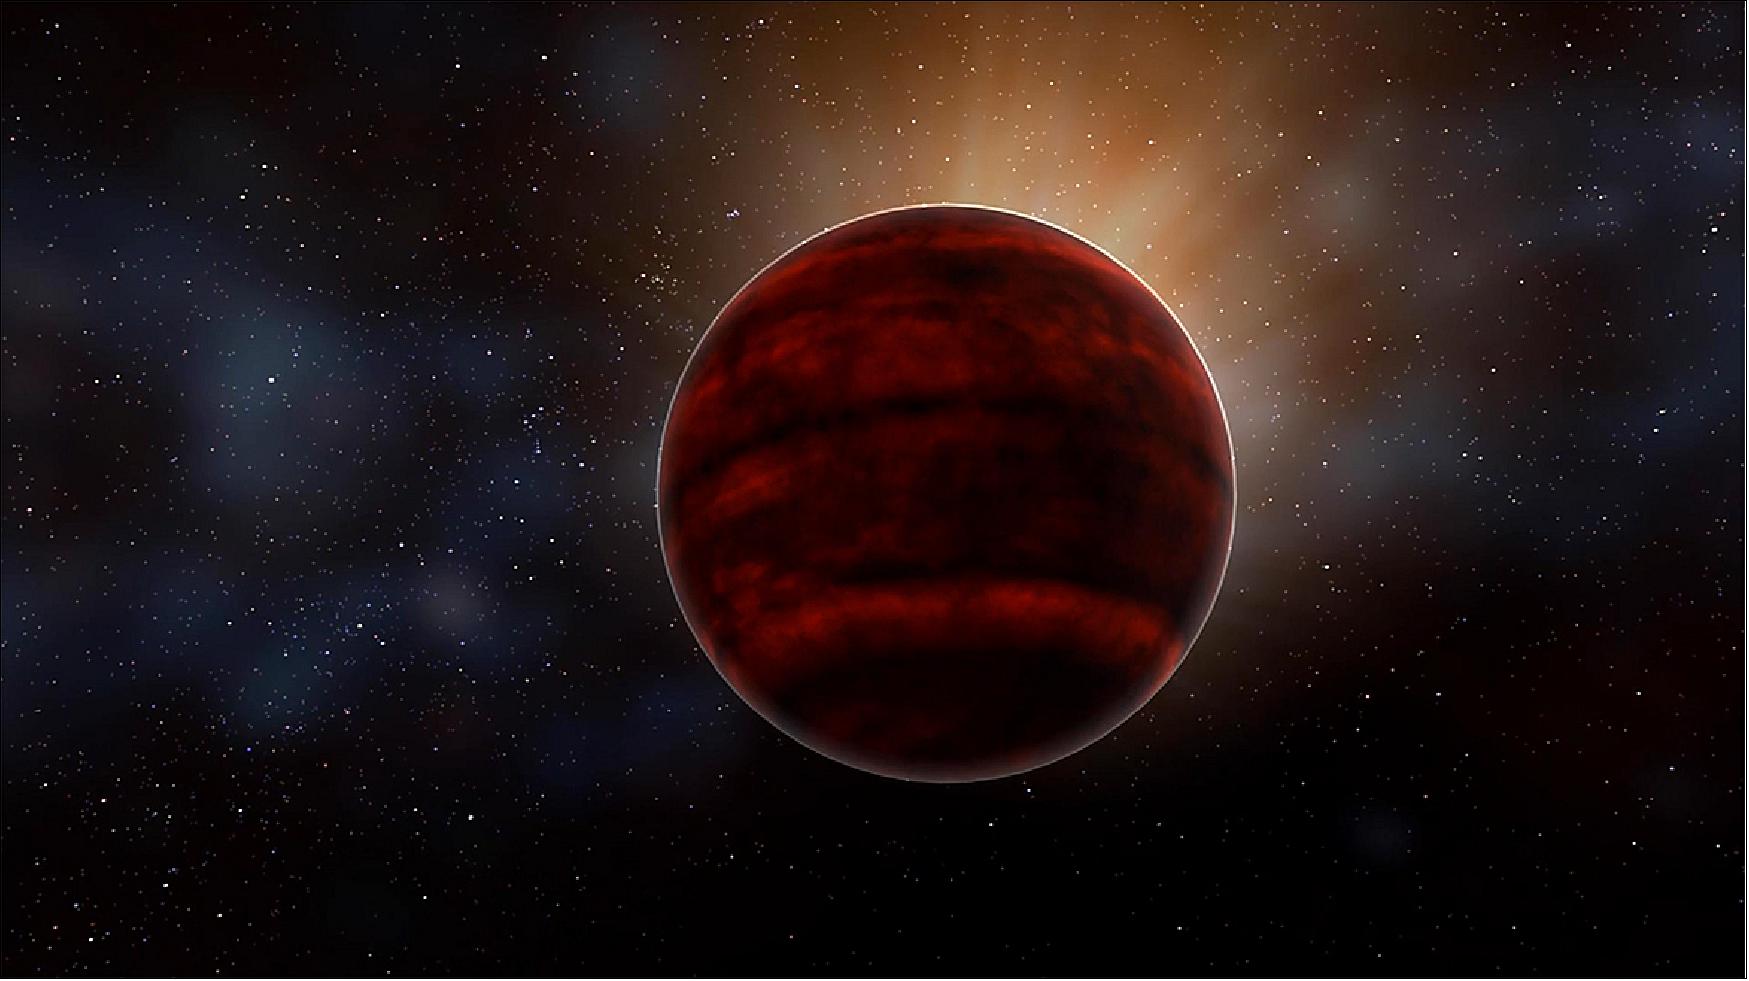 Figure 23: Artist impression of a red dwarf star like Proxima Centauri, the nearest star to our sun. New analysis of ALMA observations reveal that Proxima Centauri emitted a powerful flare that would have created inhospitable conditions for planets in that system (image Credit: NRAO/AUI/NSF; D. Berry)